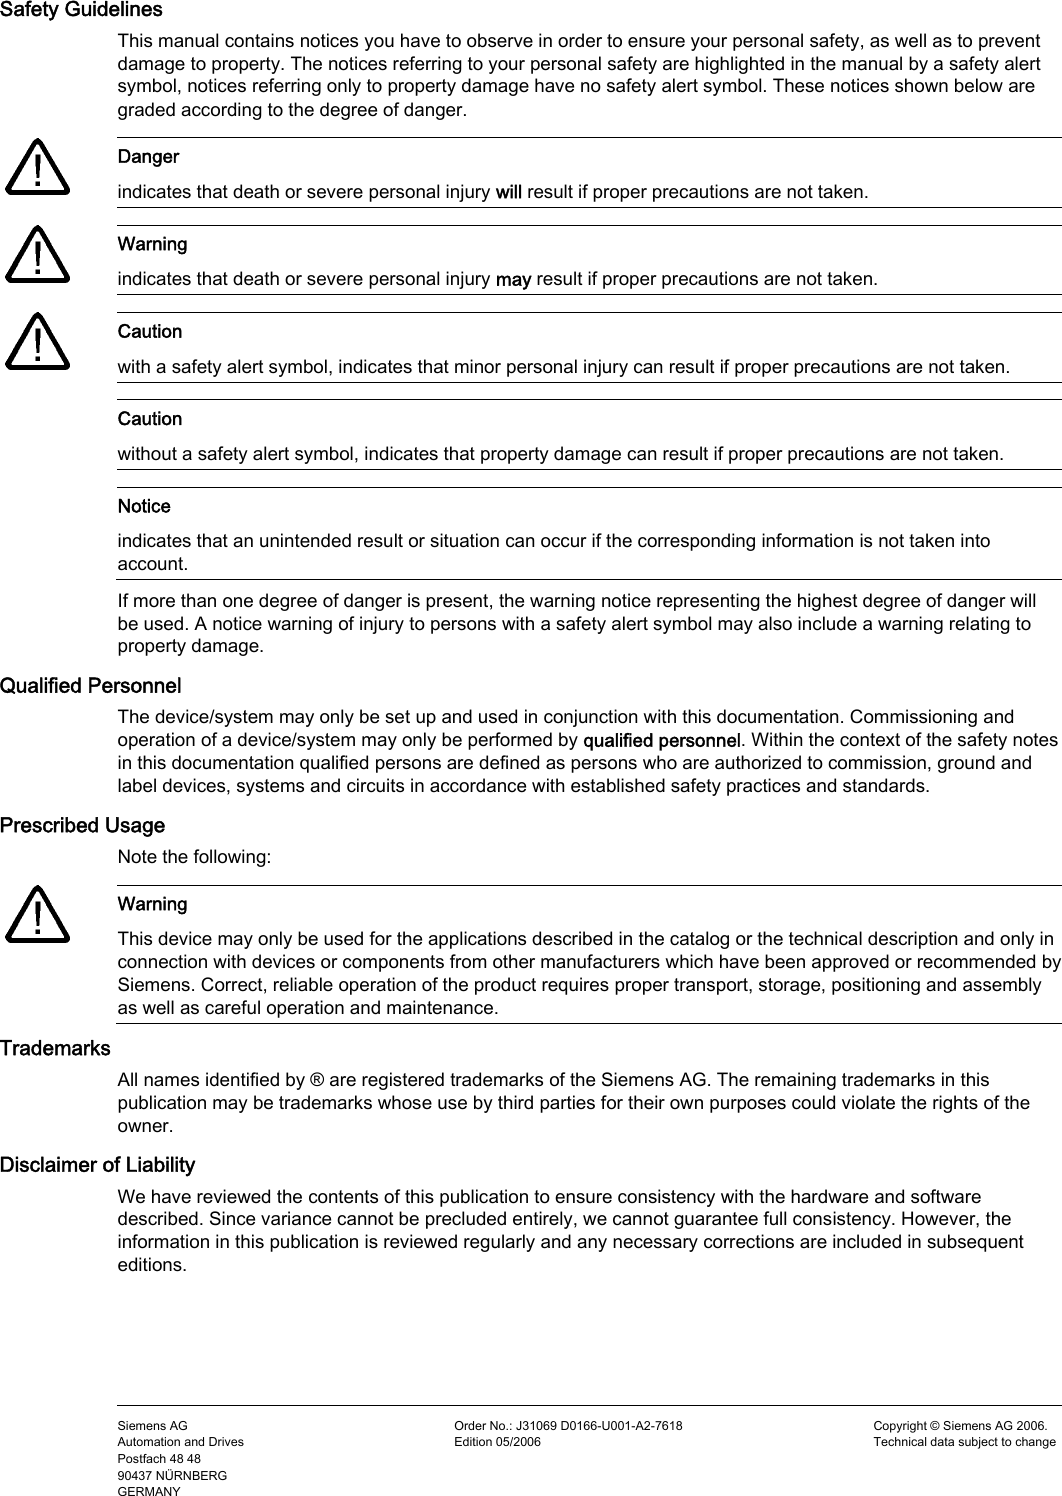      Safety Guidelines This manual contains notices you have to observe in order to ensure your personal safety, as well as to prevent damage to property. The notices referring to your personal safety are highlighted in the manual by a safety alert symbol, notices referring only to property damage have no safety alert symbol. These notices shown below are graded according to the degree of danger.    Danger indicates that death or severe personal injury will result if proper precautions are not taken.    Warning indicates that death or severe personal injury may result if proper precautions are not taken.    Caution with a safety alert symbol, indicates that minor personal injury can result if proper precautions are not taken.  Caution without a safety alert symbol, indicates that property damage can result if proper precautions are not taken.  Notice indicates that an unintended result or situation can occur if the corresponding information is not taken into account. If more than one degree of danger is present, the warning notice representing the highest degree of danger will be used. A notice warning of injury to persons with a safety alert symbol may also include a warning relating to property damage. Qualified Personnel The device/system may only be set up and used in conjunction with this documentation. Commissioning and operation of a device/system may only be performed by qualified personnel. Within the context of the safety notes in this documentation qualified persons are defined as persons who are authorized to commission, ground and label devices, systems and circuits in accordance with established safety practices and standards. Prescribed Usage Note the following:    Warning This device may only be used for the applications described in the catalog or the technical description and only in connection with devices or components from other manufacturers which have been approved or recommended by Siemens. Correct, reliable operation of the product requires proper transport, storage, positioning and assembly as well as careful operation and maintenance. Trademarks All names identified by ® are registered trademarks of the Siemens AG. The remaining trademarks in this publication may be trademarks whose use by third parties for their own purposes could violate the rights of the owner. Disclaimer of Liability We have reviewed the contents of this publication to ensure consistency with the hardware and software described. Since variance cannot be precluded entirely, we cannot guarantee full consistency. However, the information in this publication is reviewed regularly and any necessary corrections are included in subsequent editions.    Siemens AG Automation and Drives Postfach 48 48 90437 NÜRNBERG GERMANY Order No.: J31069 D0166-U001-A2-7618 Edition 05/2006 Copyright © Siemens AG 2006. Technical data subject to change